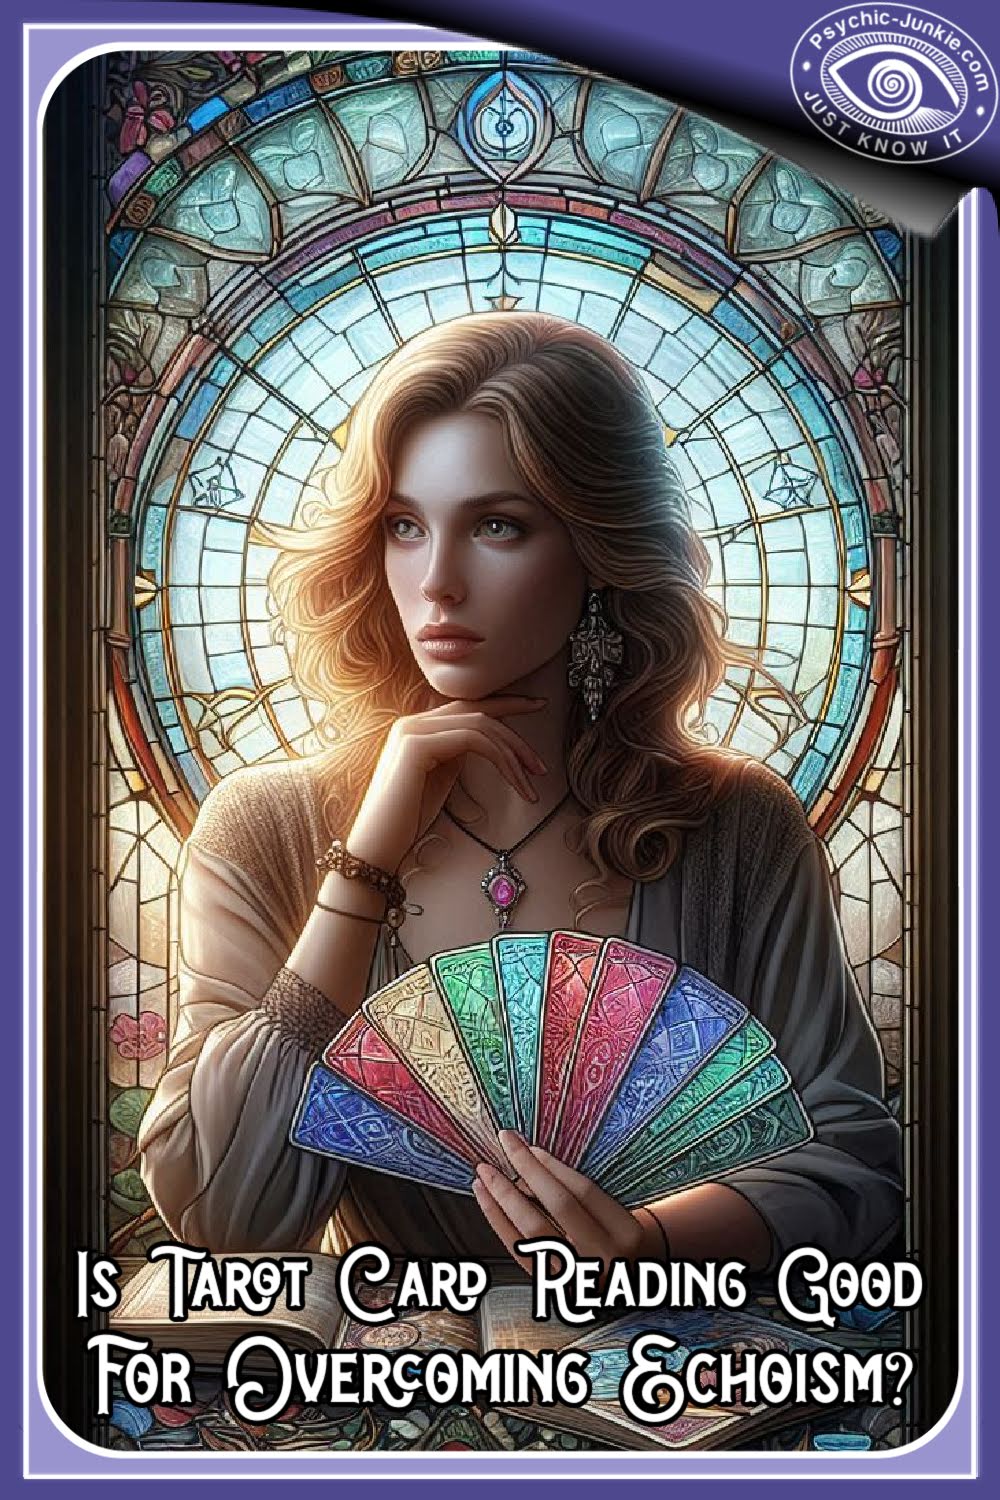 Is Tarot Card Reading Good For Overcoming Echoism?